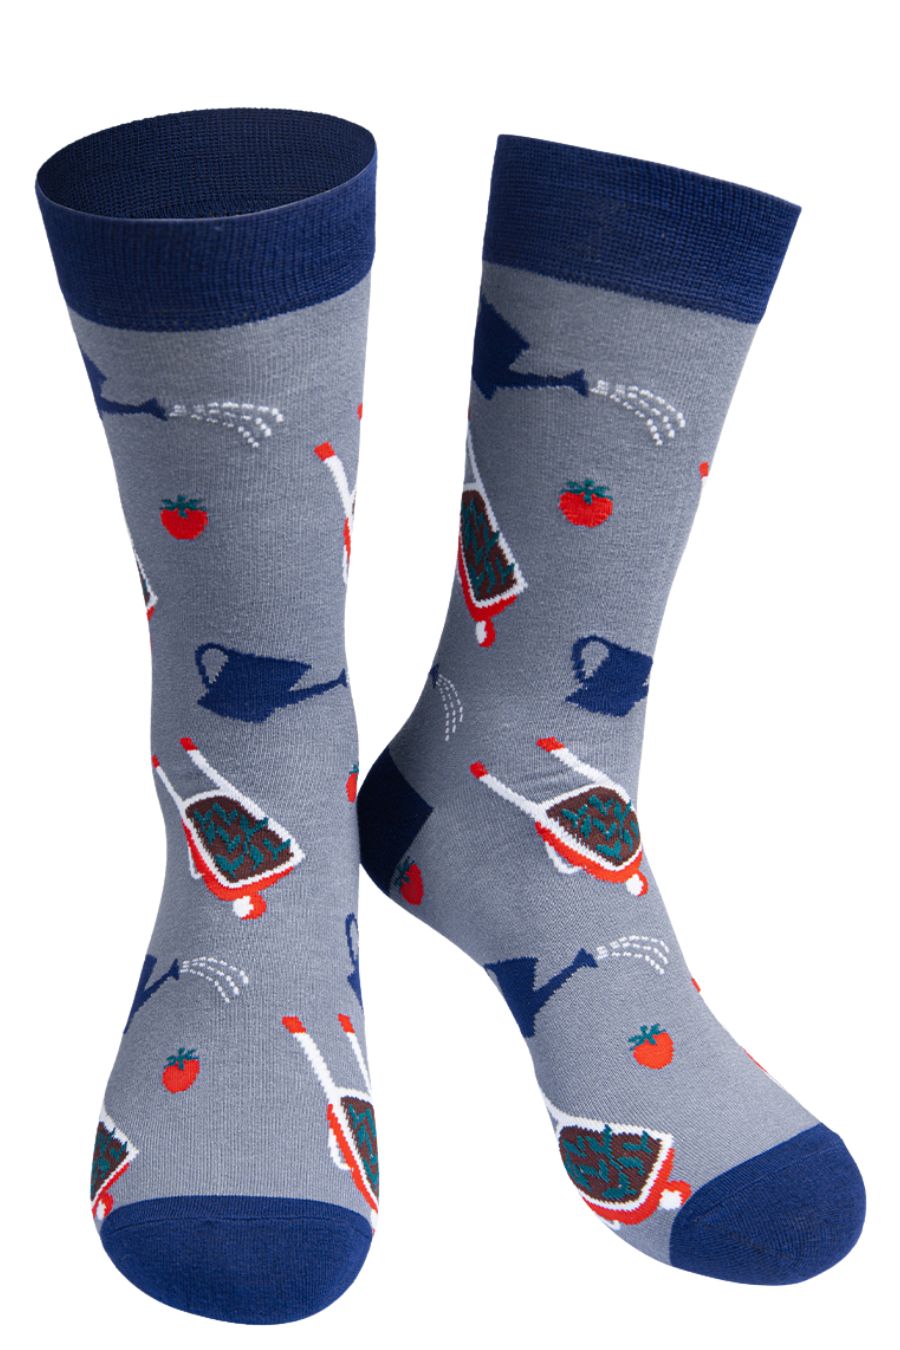 grey, navy blue bamboo socks featuring wheelbarrows, watering cans and tomatos